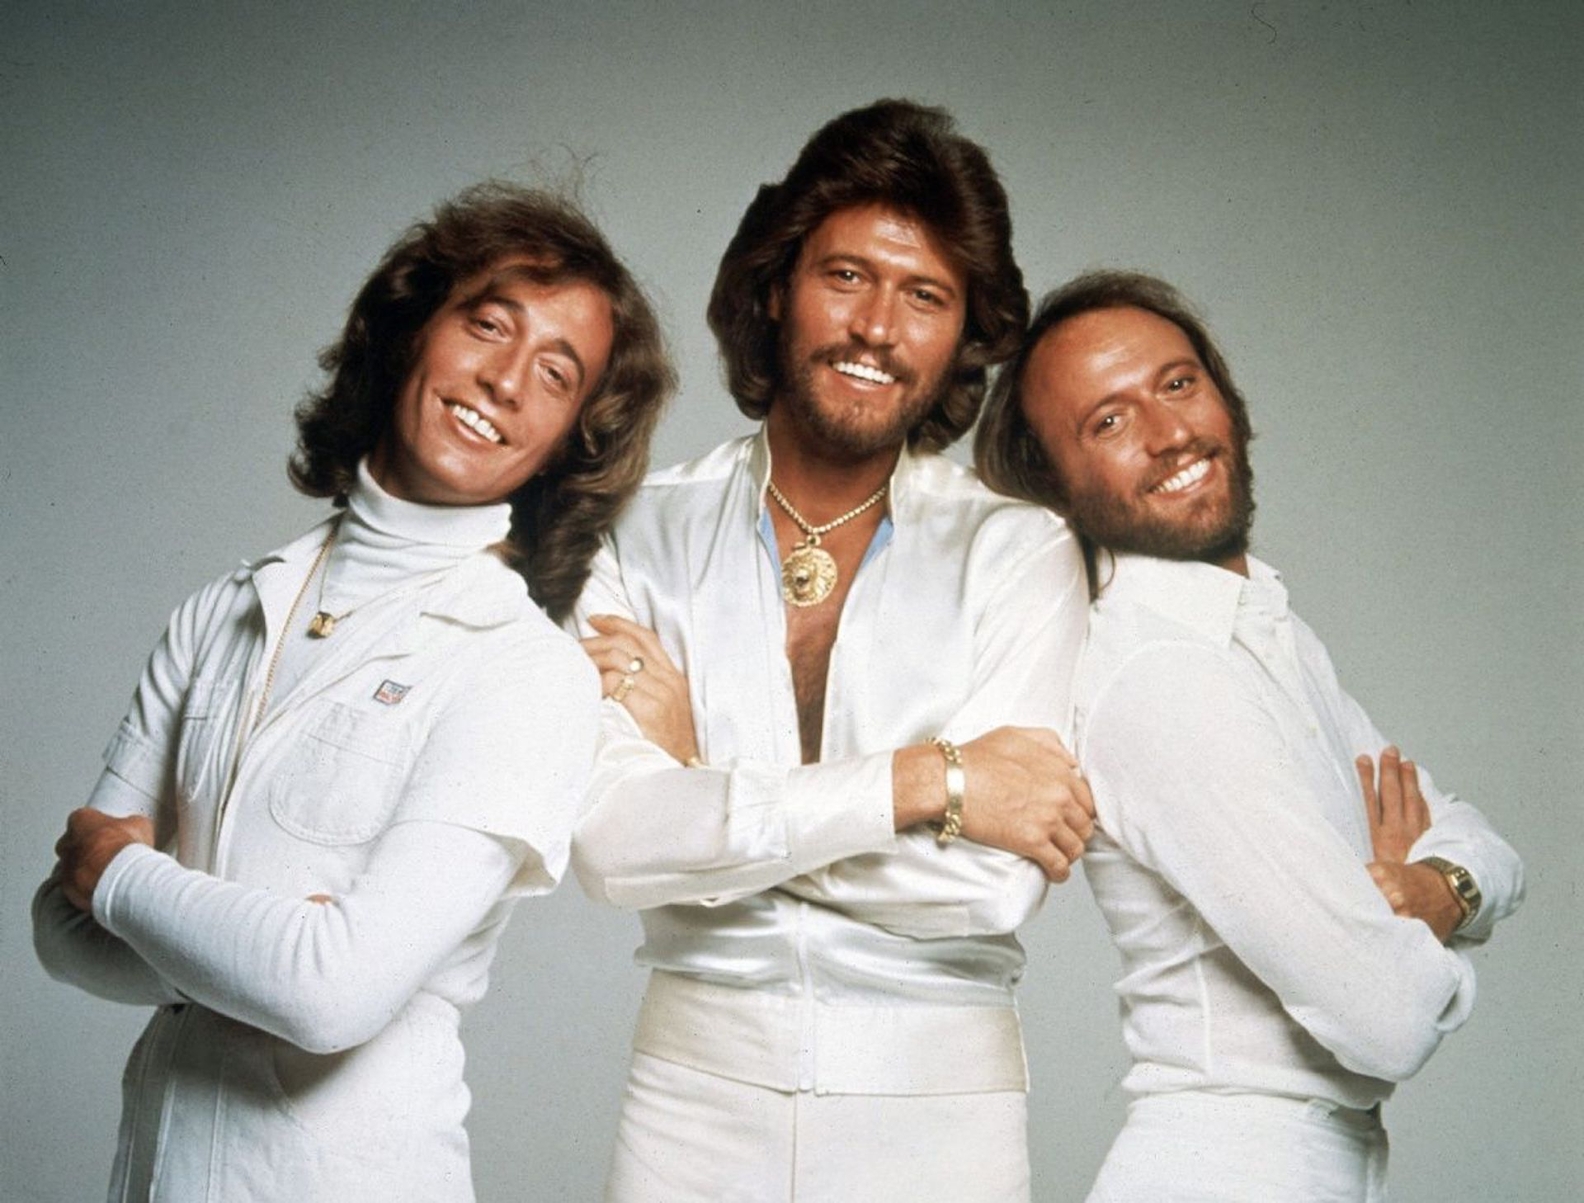 hi google can you put the bee gees greatest hits